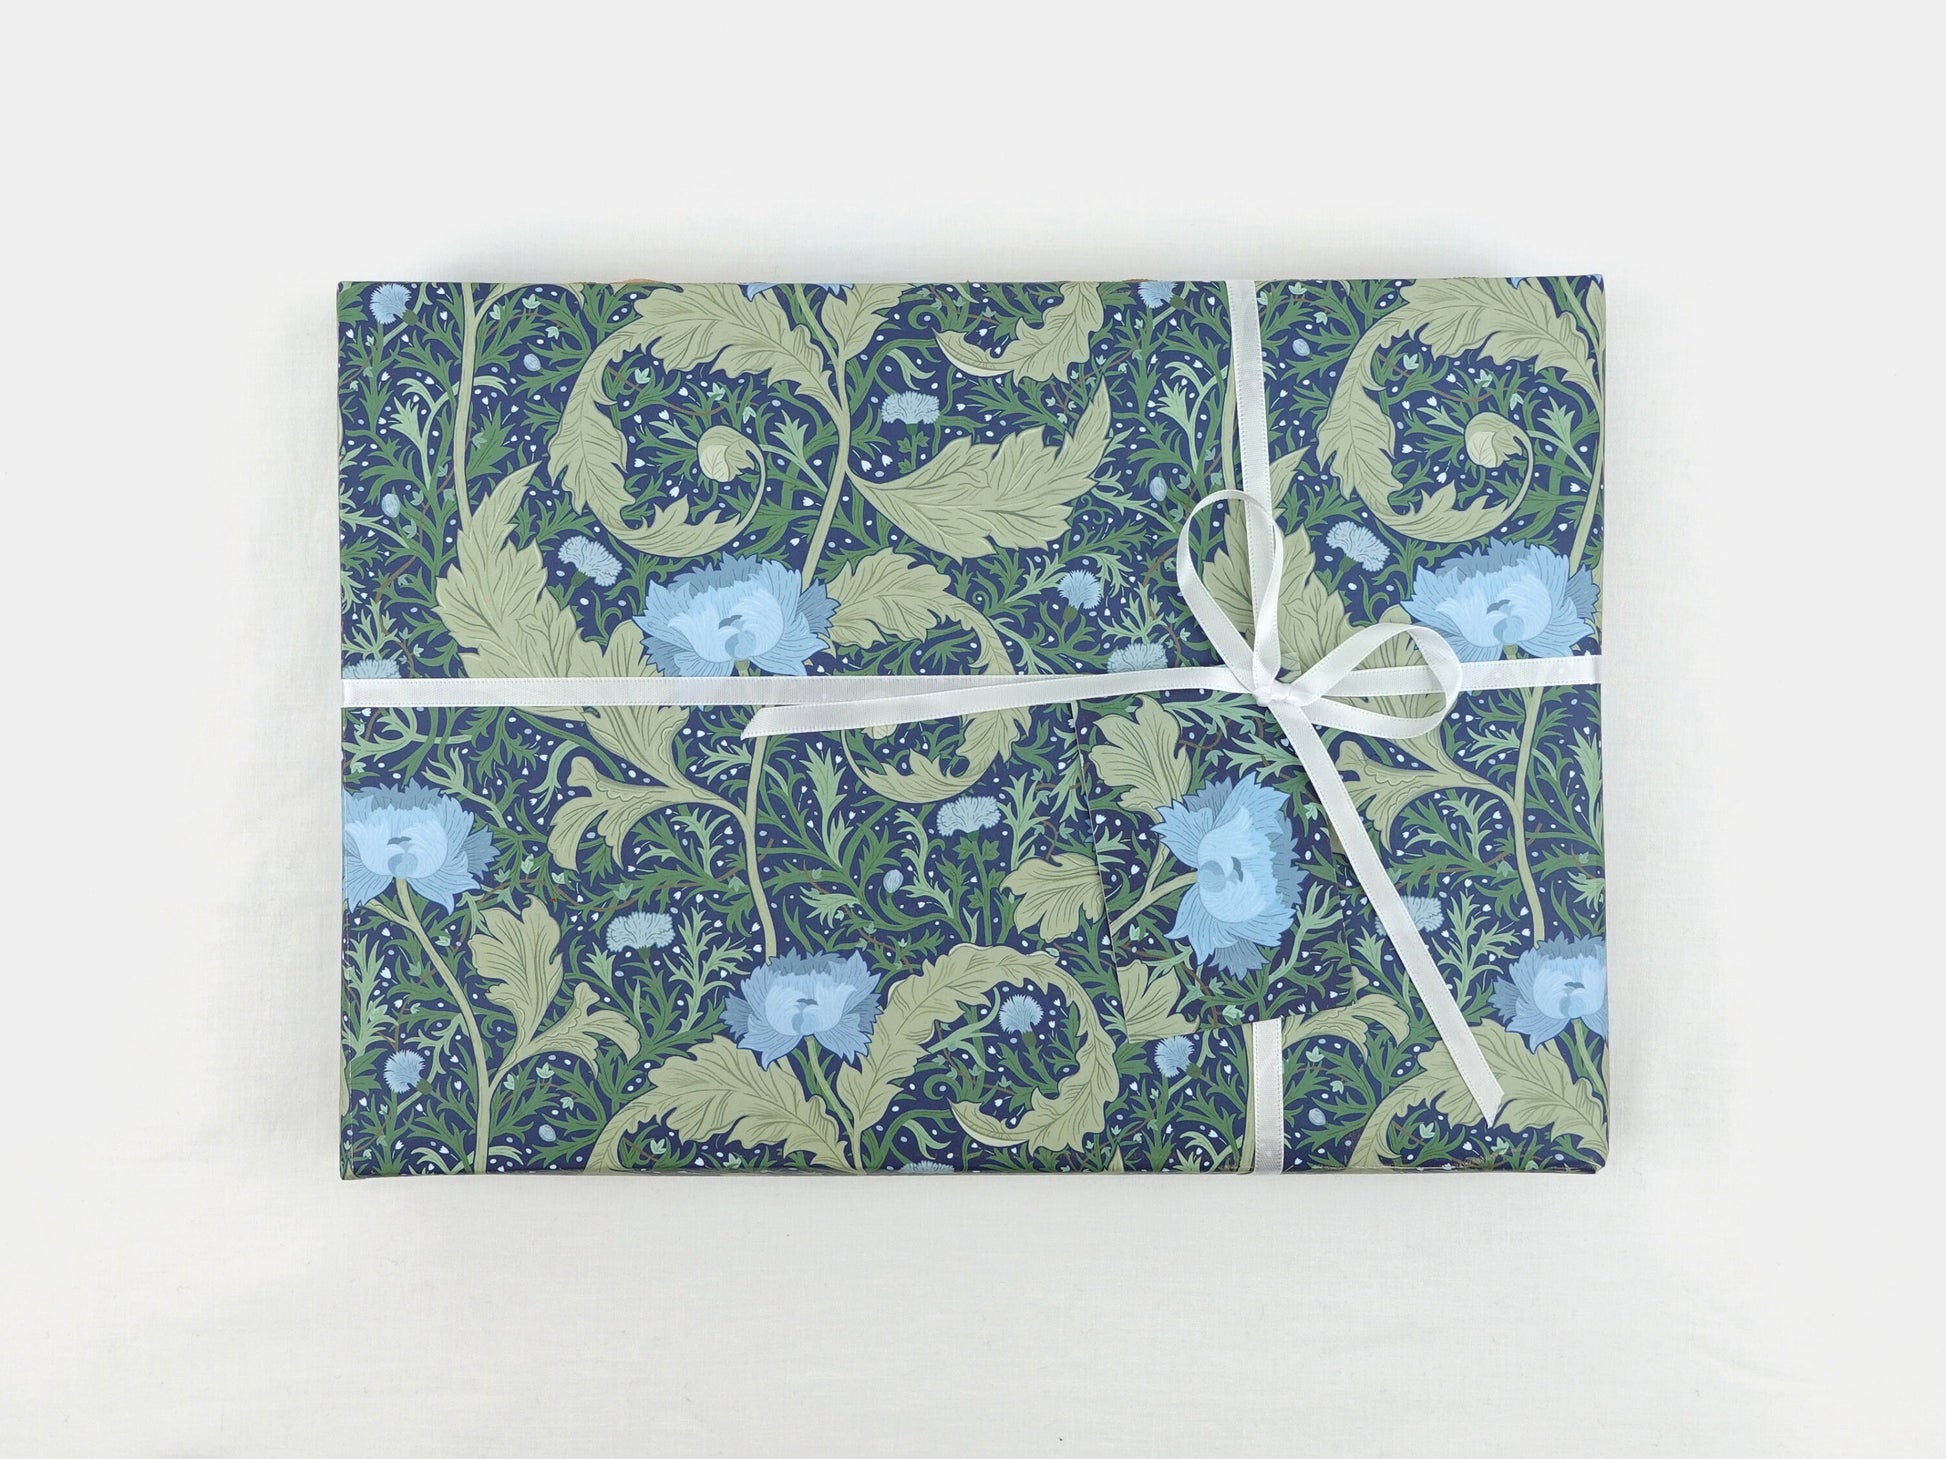 Floral wrapping paper | William Morris Inspired Eco friendly gift wrap | Premium quality sheets + Tags | Zero plastic packaging 70x50cm